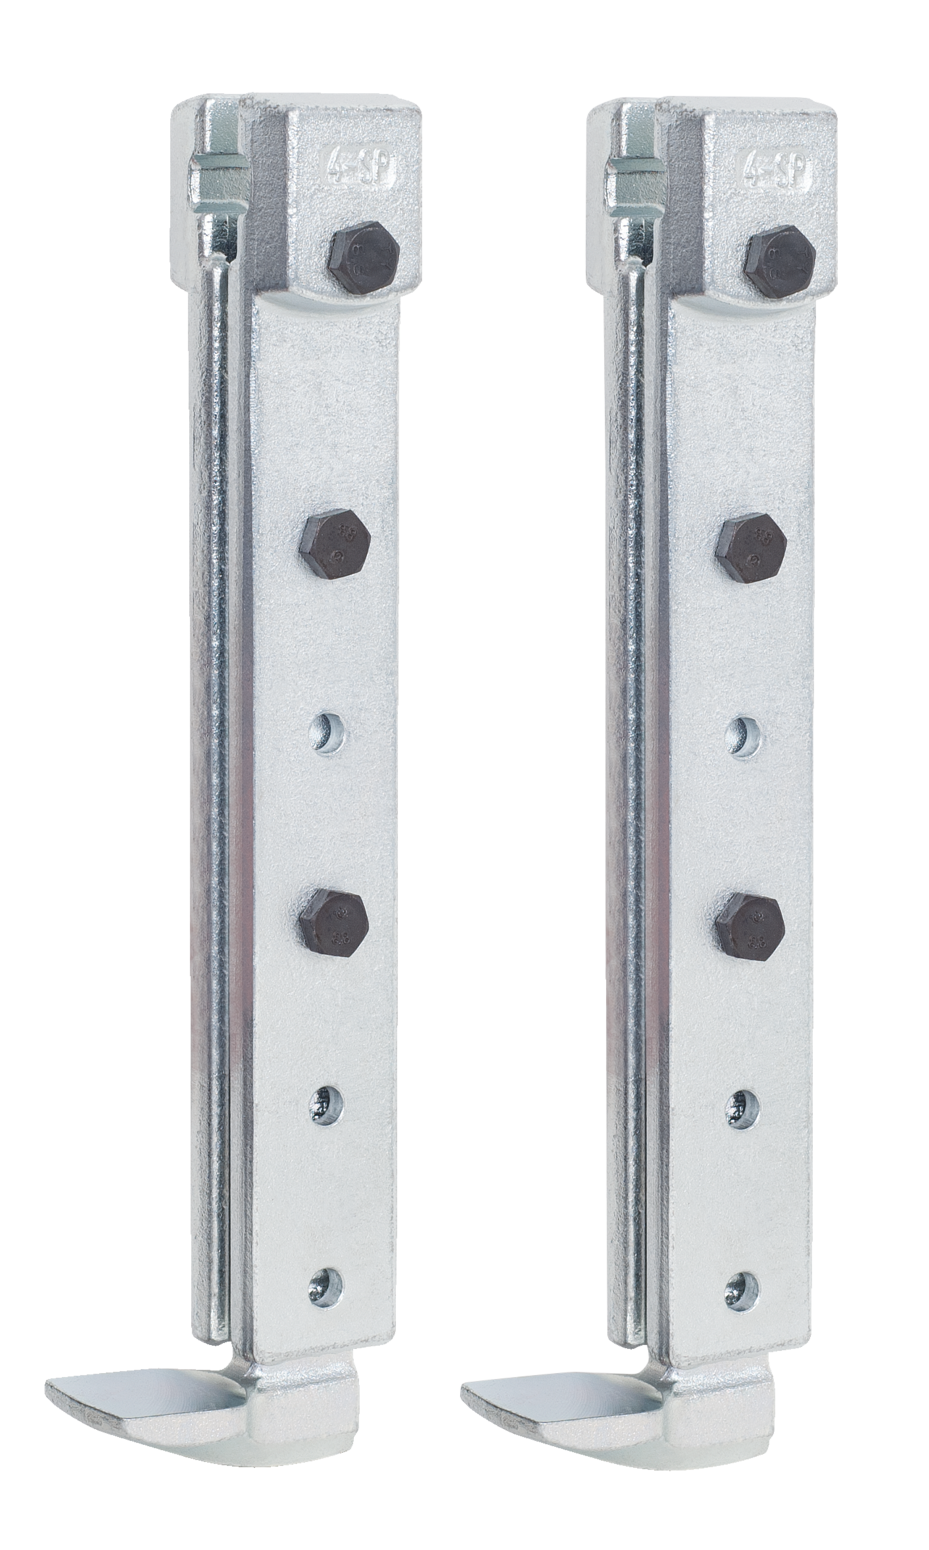 A pair of adjustable length SP-P series trigger hooks for 2-arm universal pullers